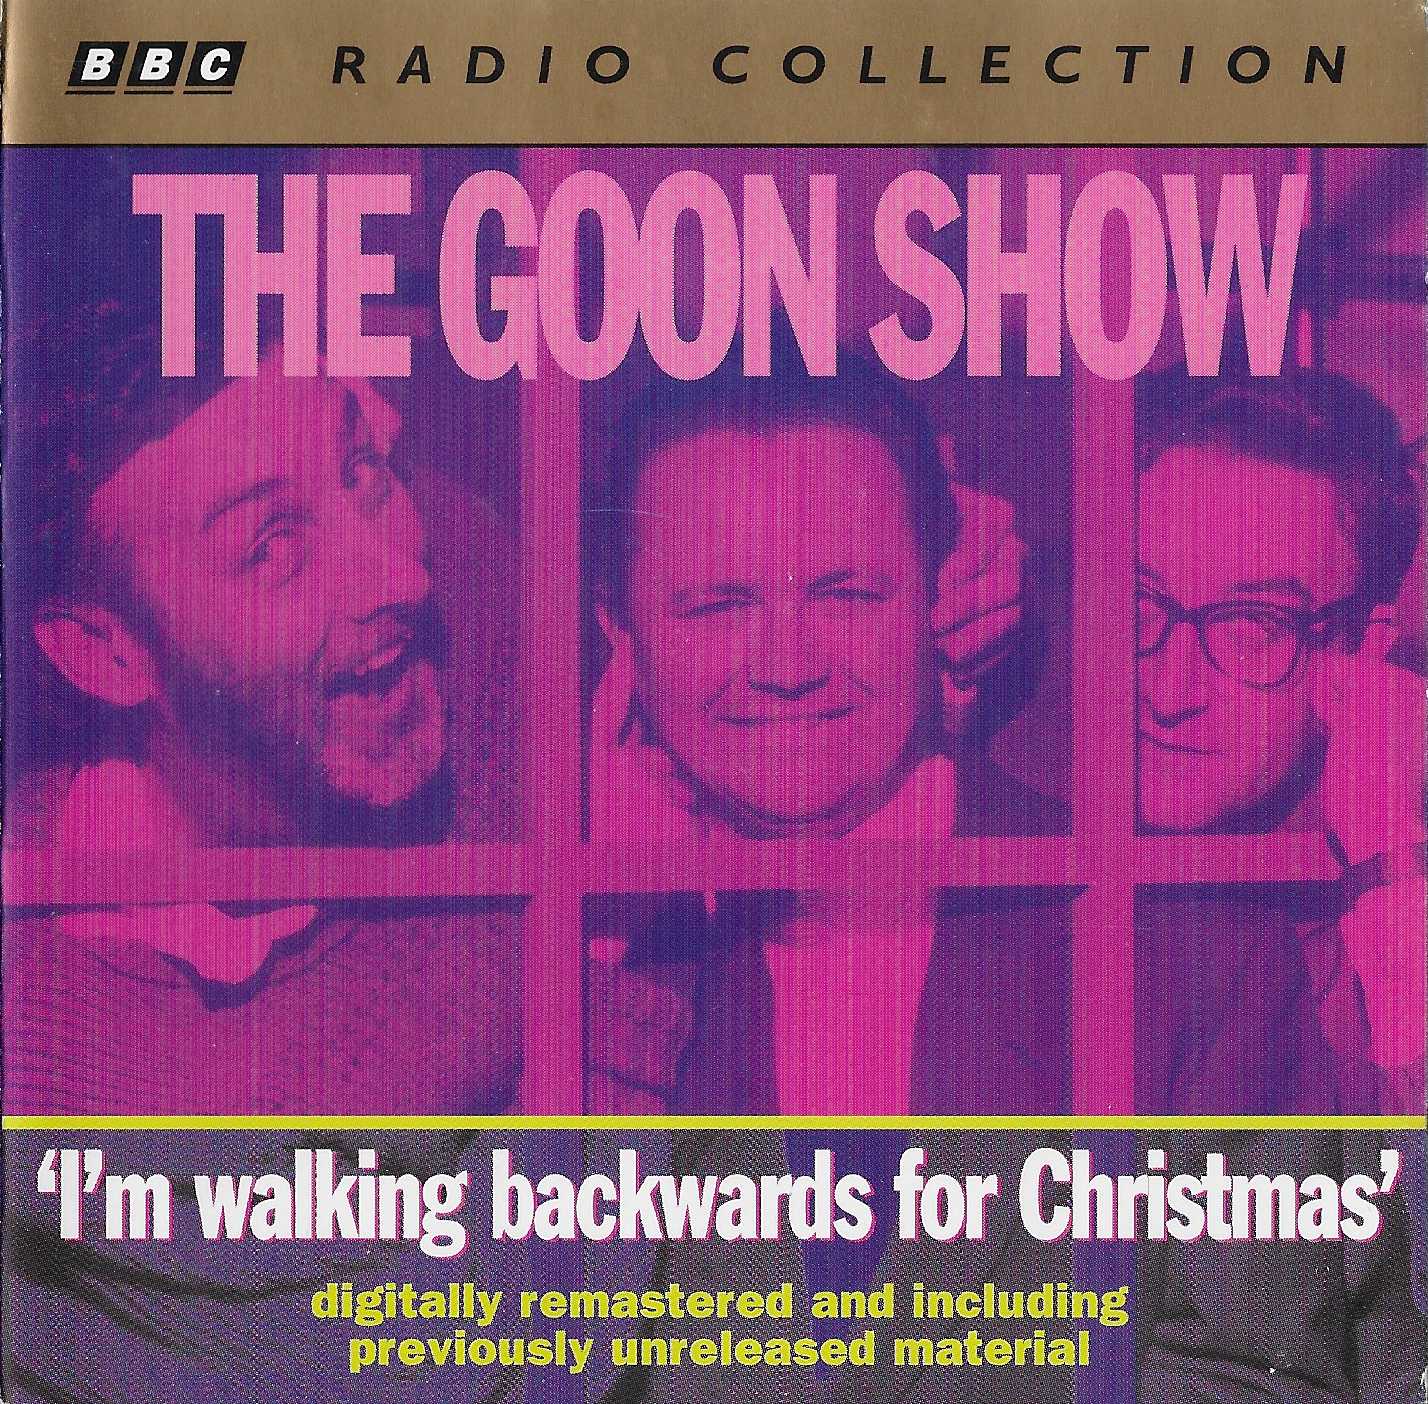 Picture of The Goon show 3 - I'm walking backwards for Christmas by artist Spike Milligan / Larry Stephens from the BBC cds - Records and Tapes library